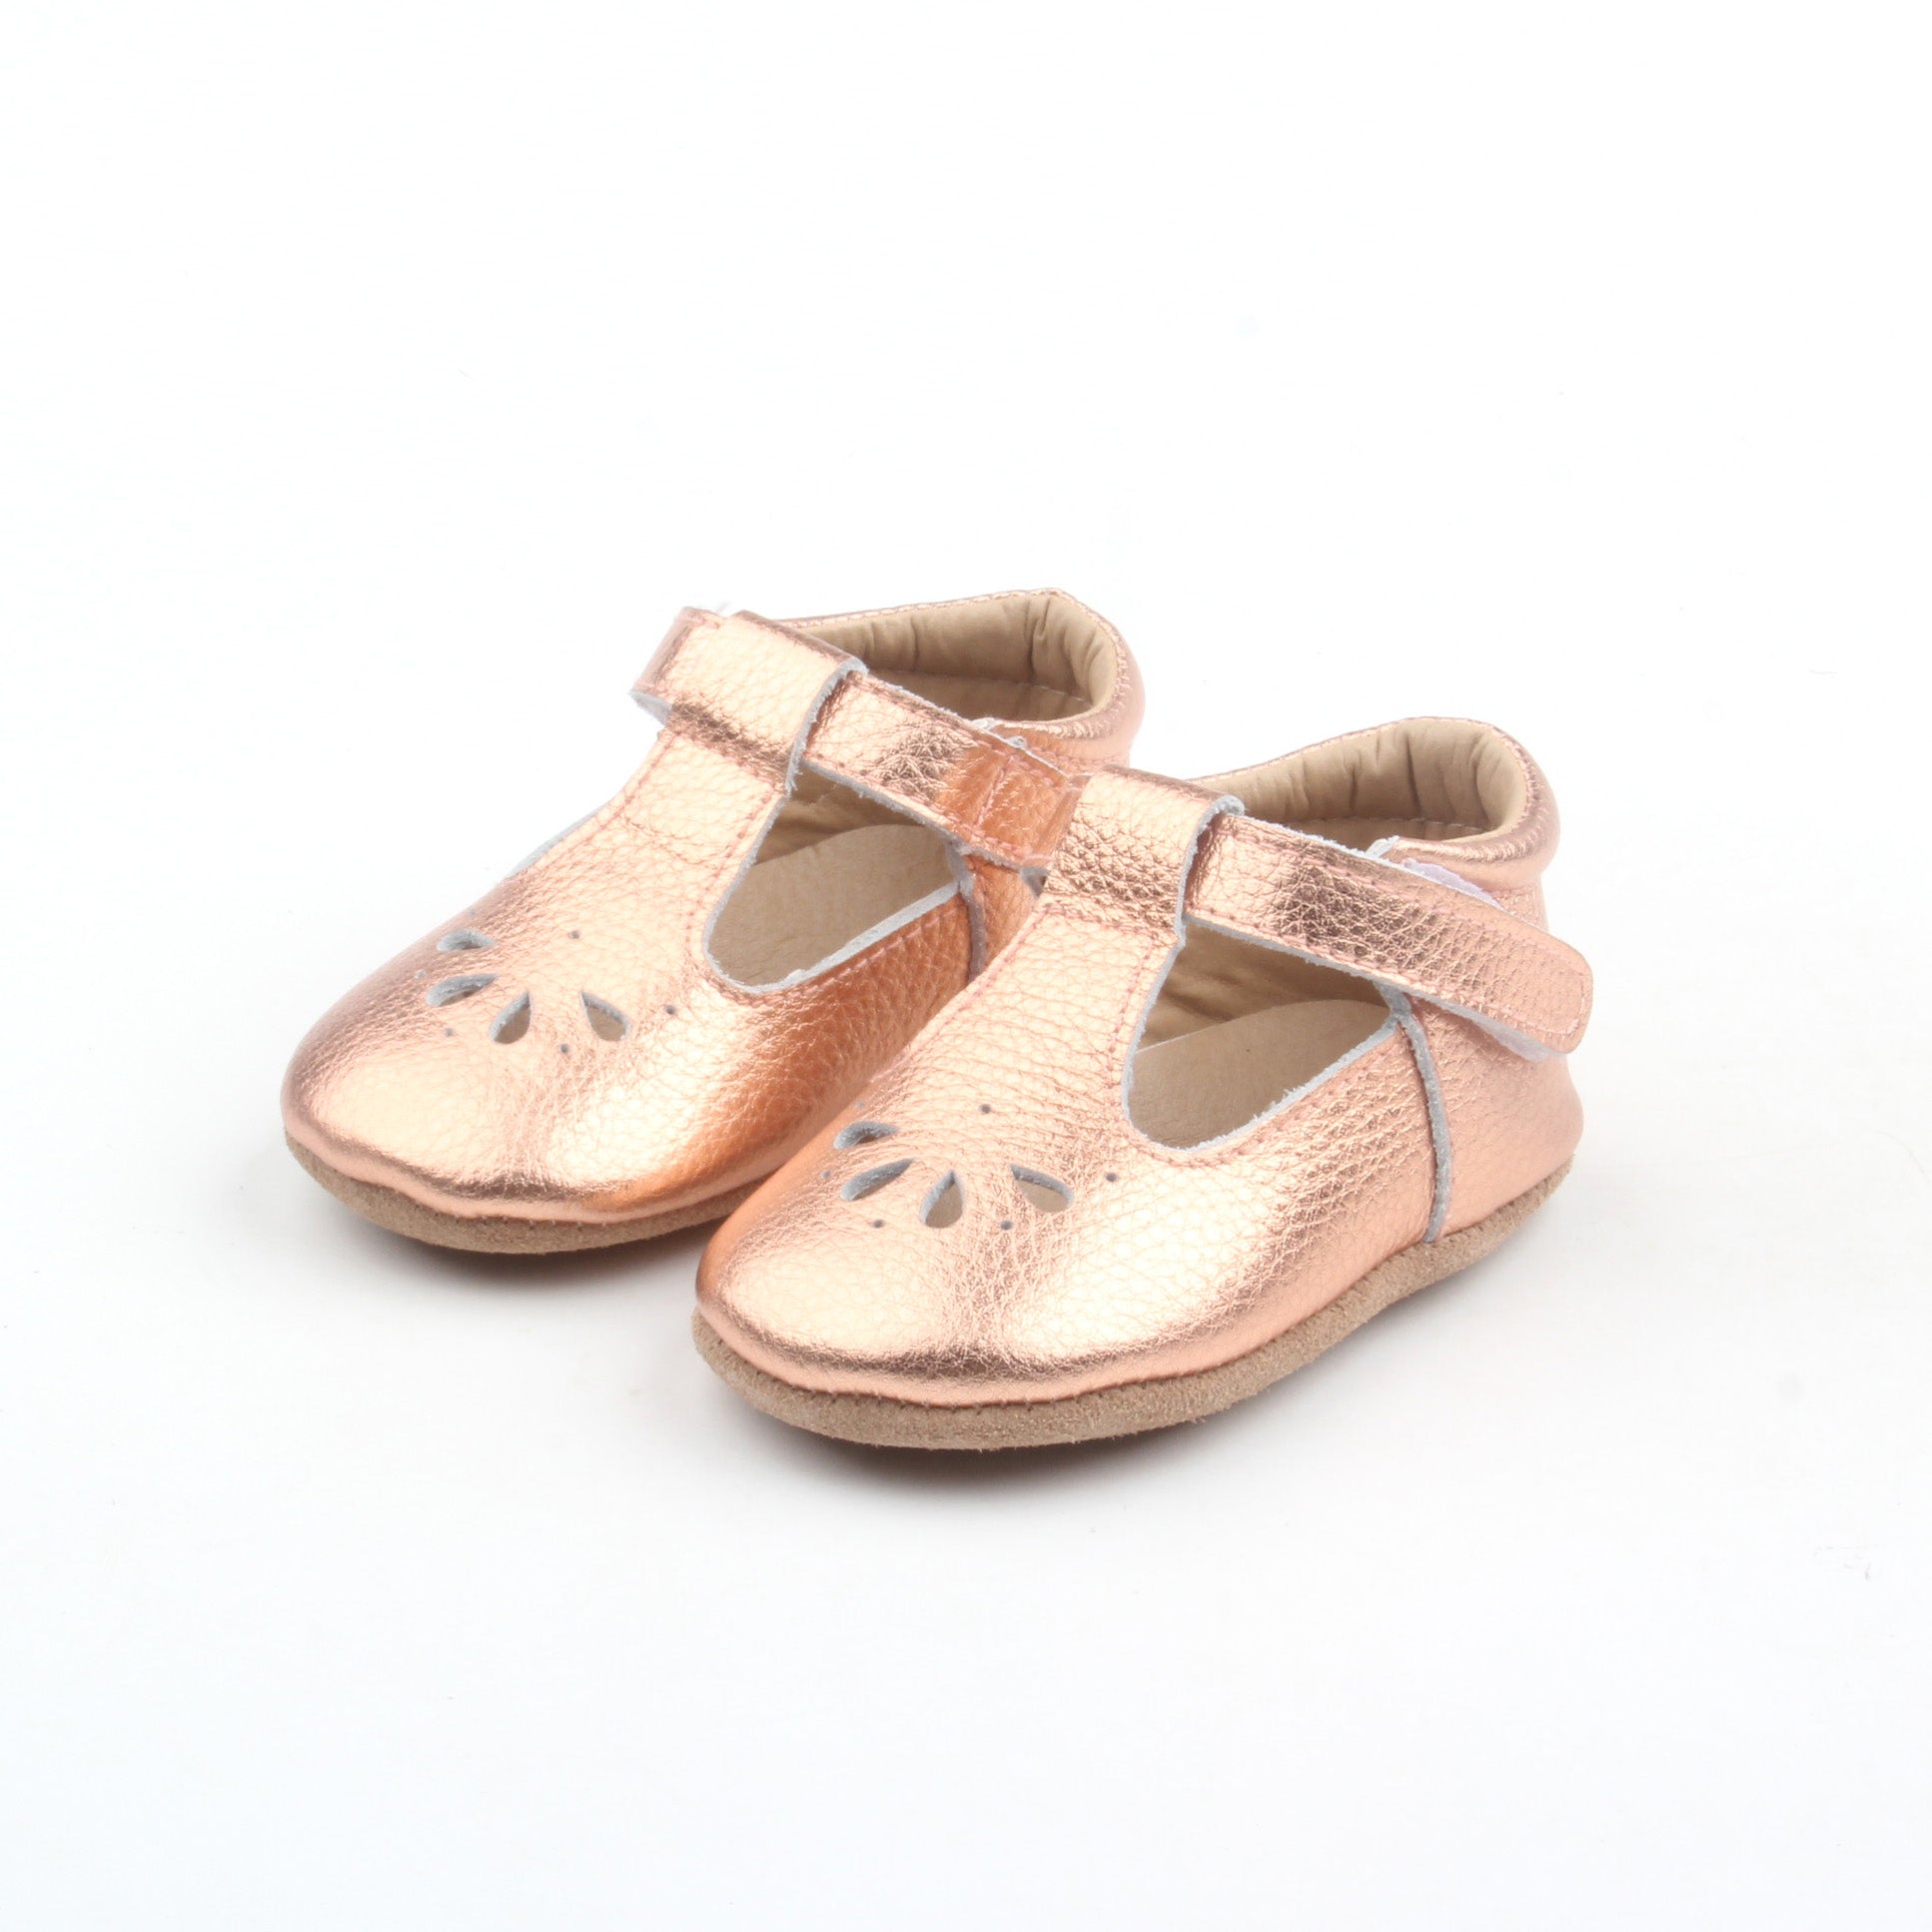 Lily T-bar Mary Jane Moccasin Style Baby Shoes